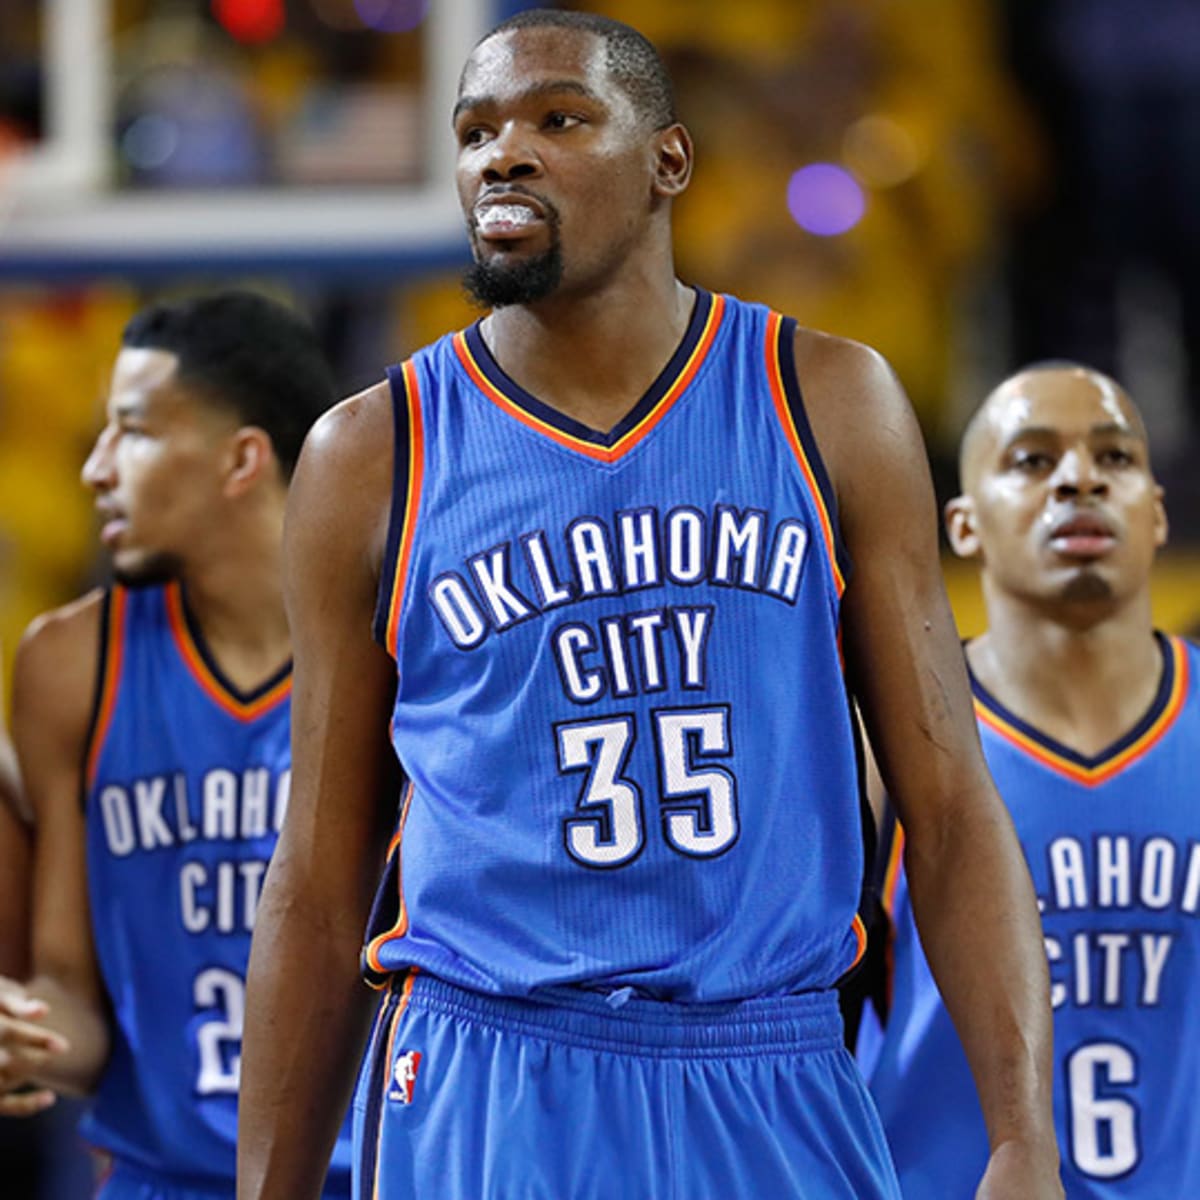 Kevin Durant is the NBA's best player, but the Warriors are way